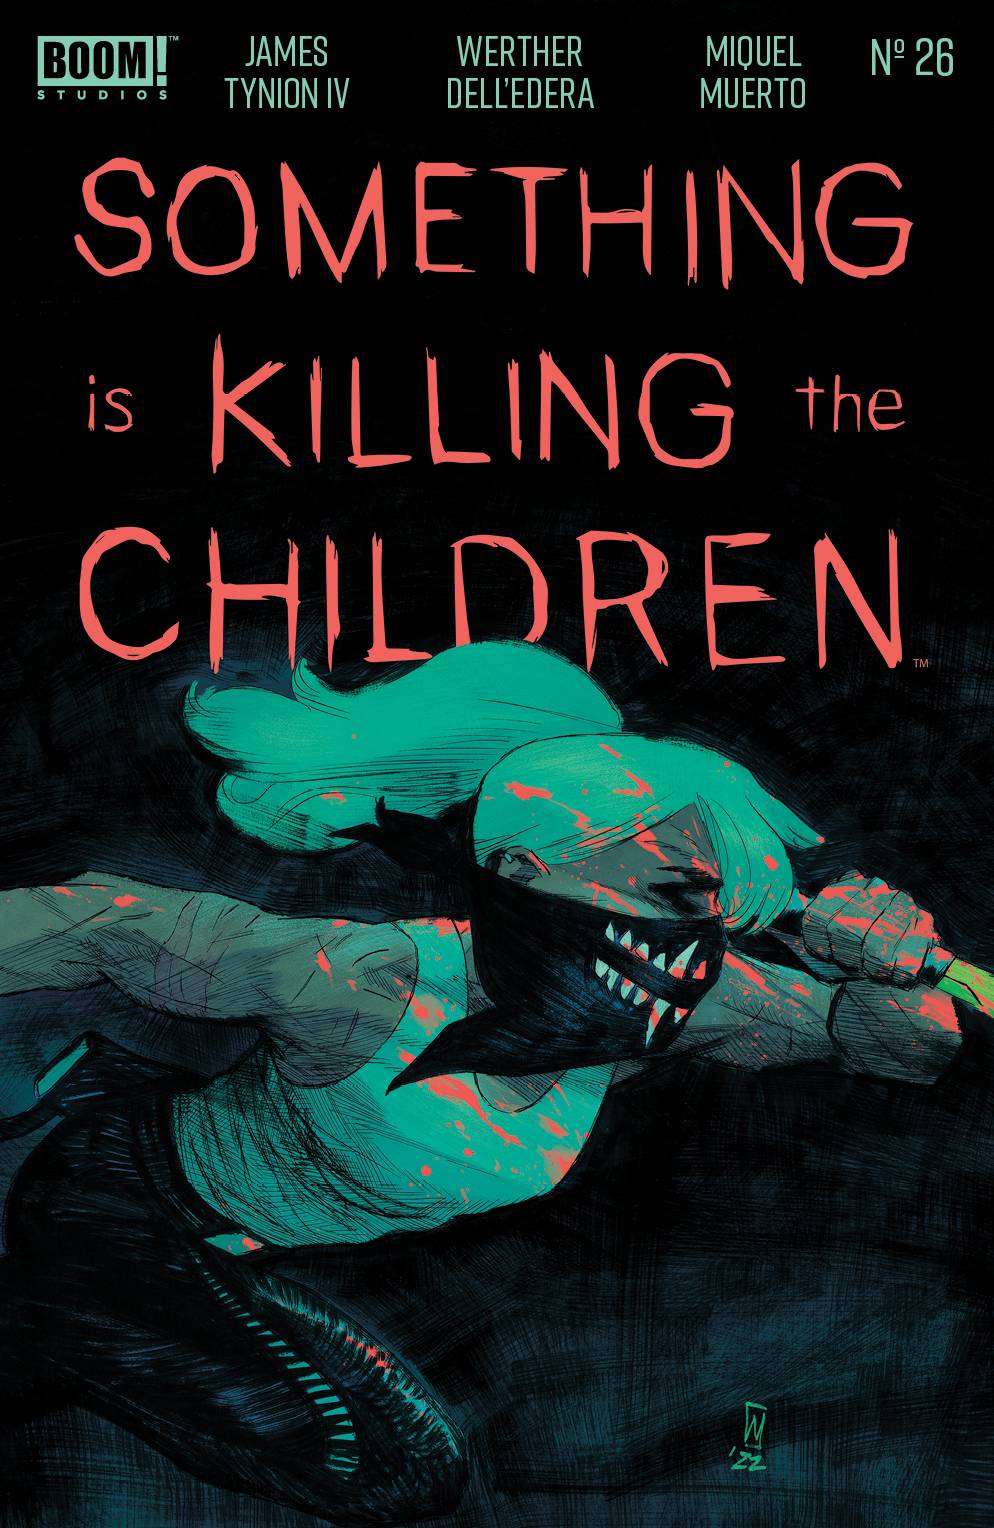 Something Is Killing The Children #26 (2019) Boom A Dell Edera 11/16/2022 | BD Cosmos